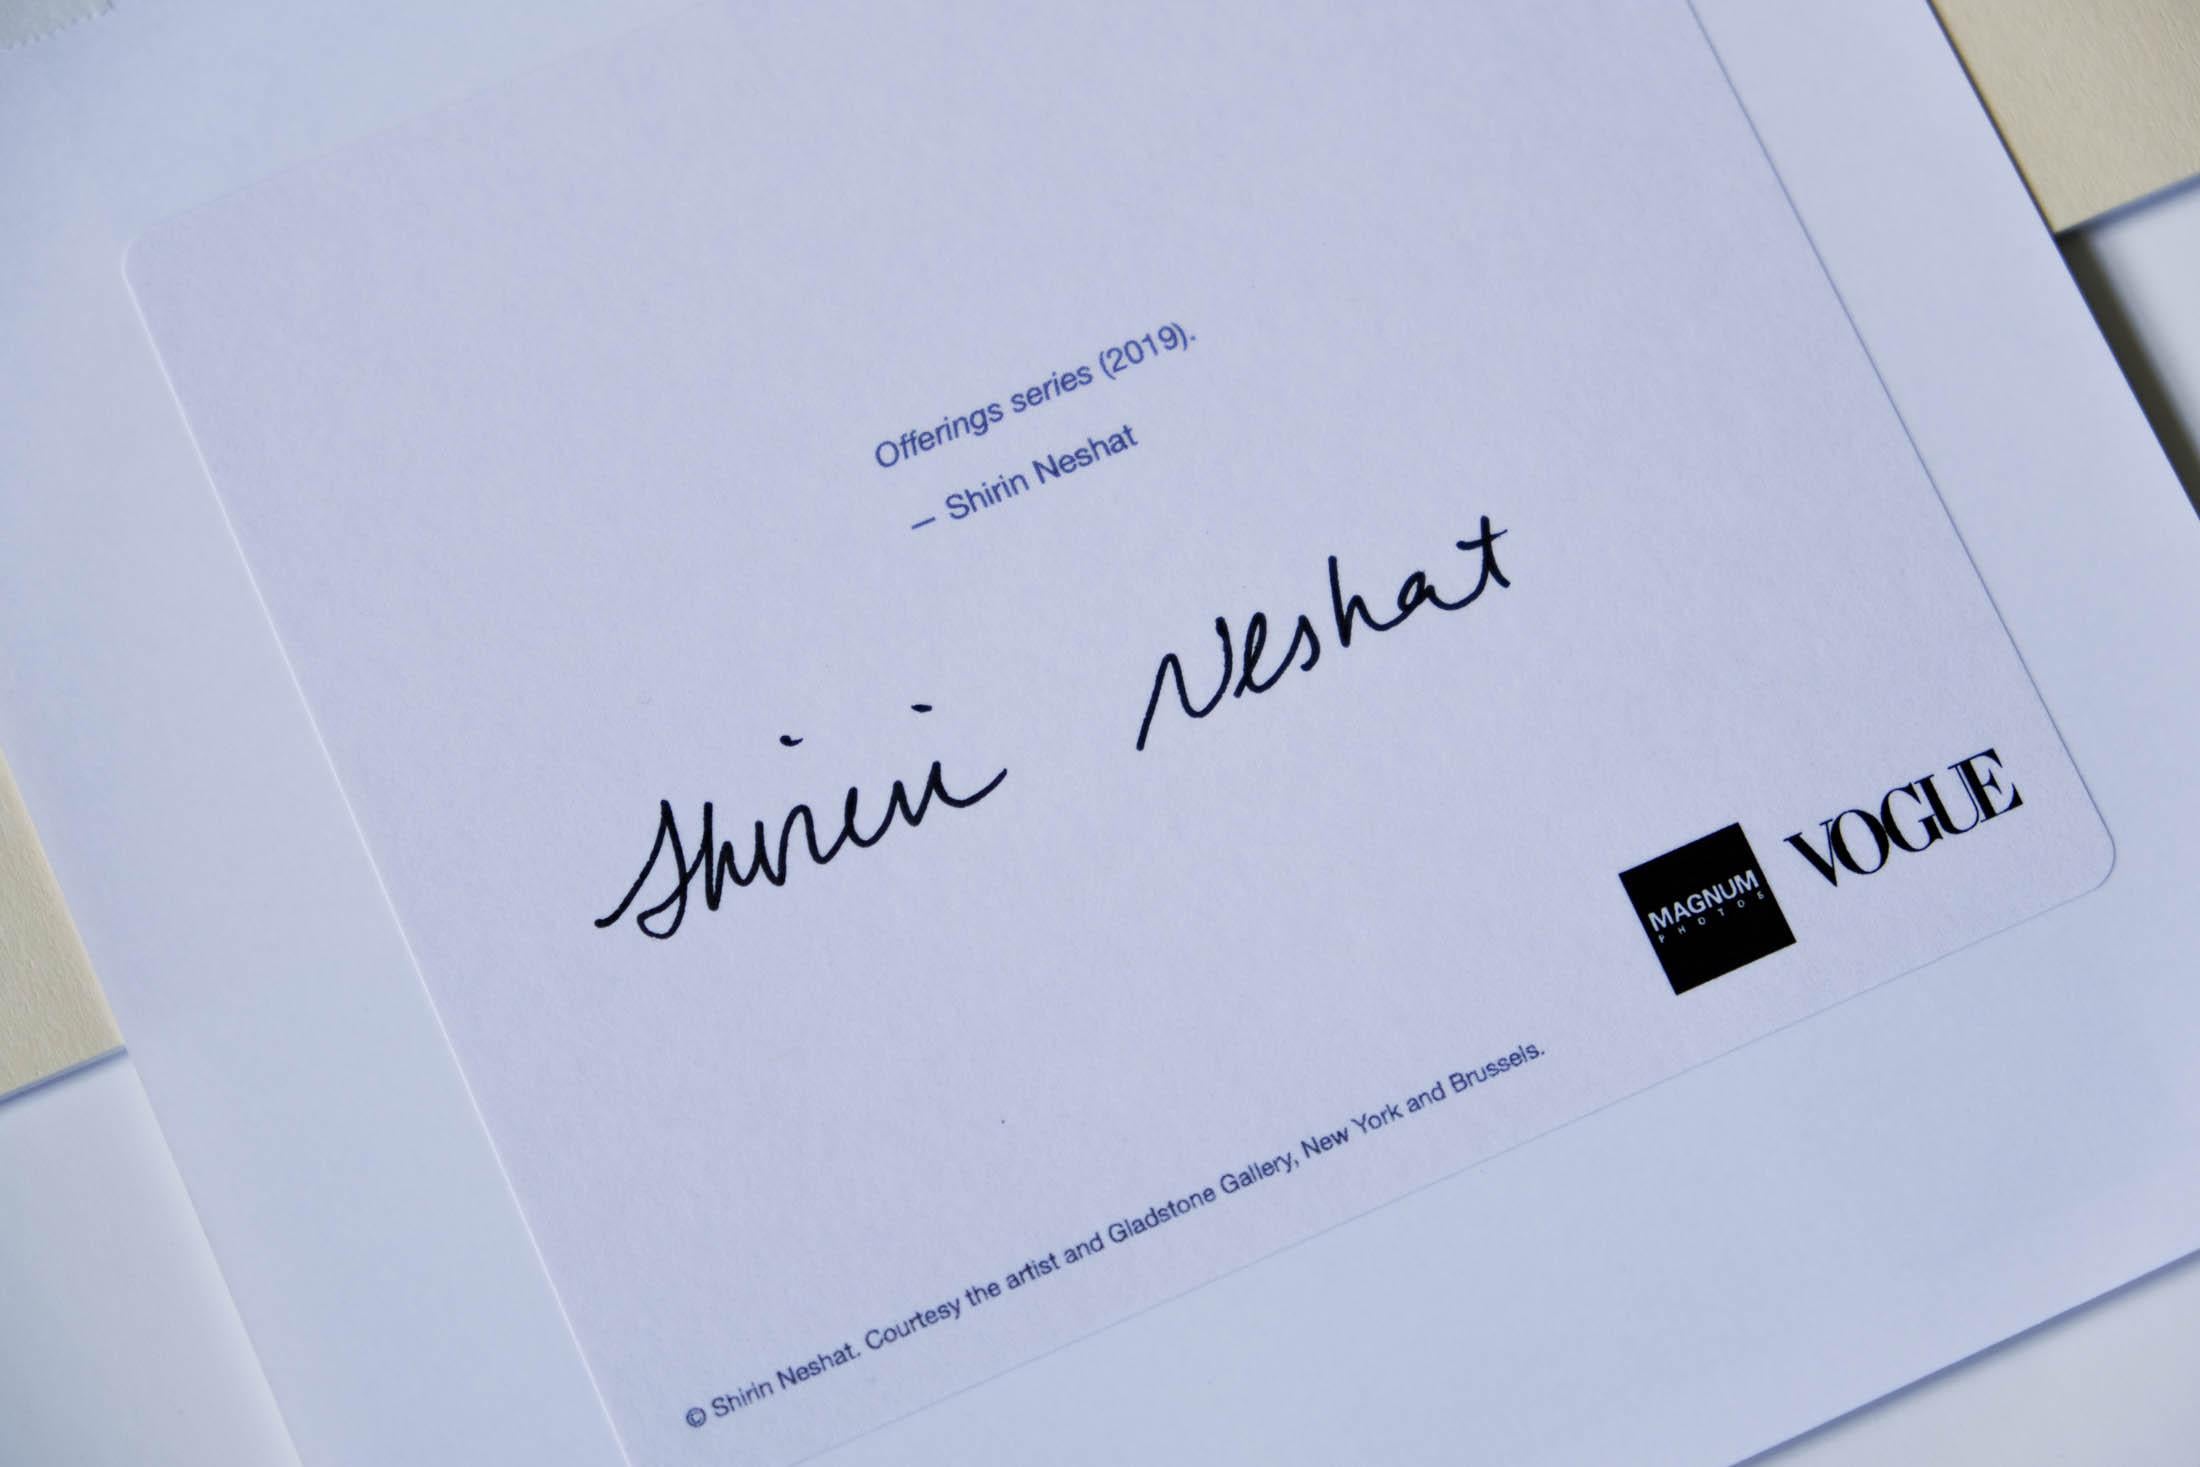 Paper Signed Shirin Neshat “Offerings Series